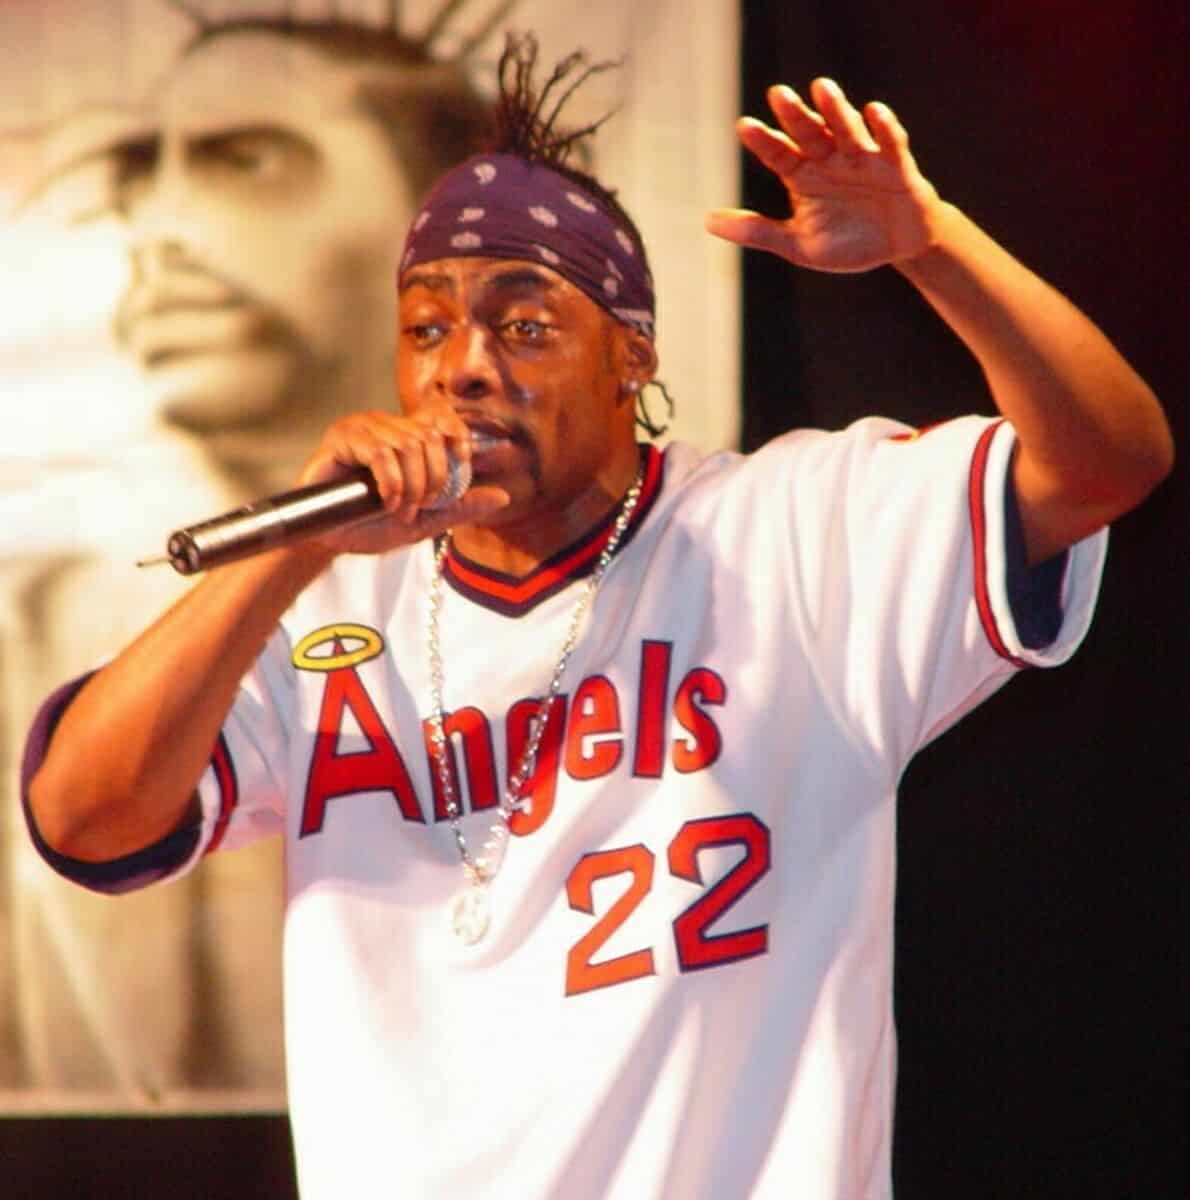 Coolio net worth in Celebrities category